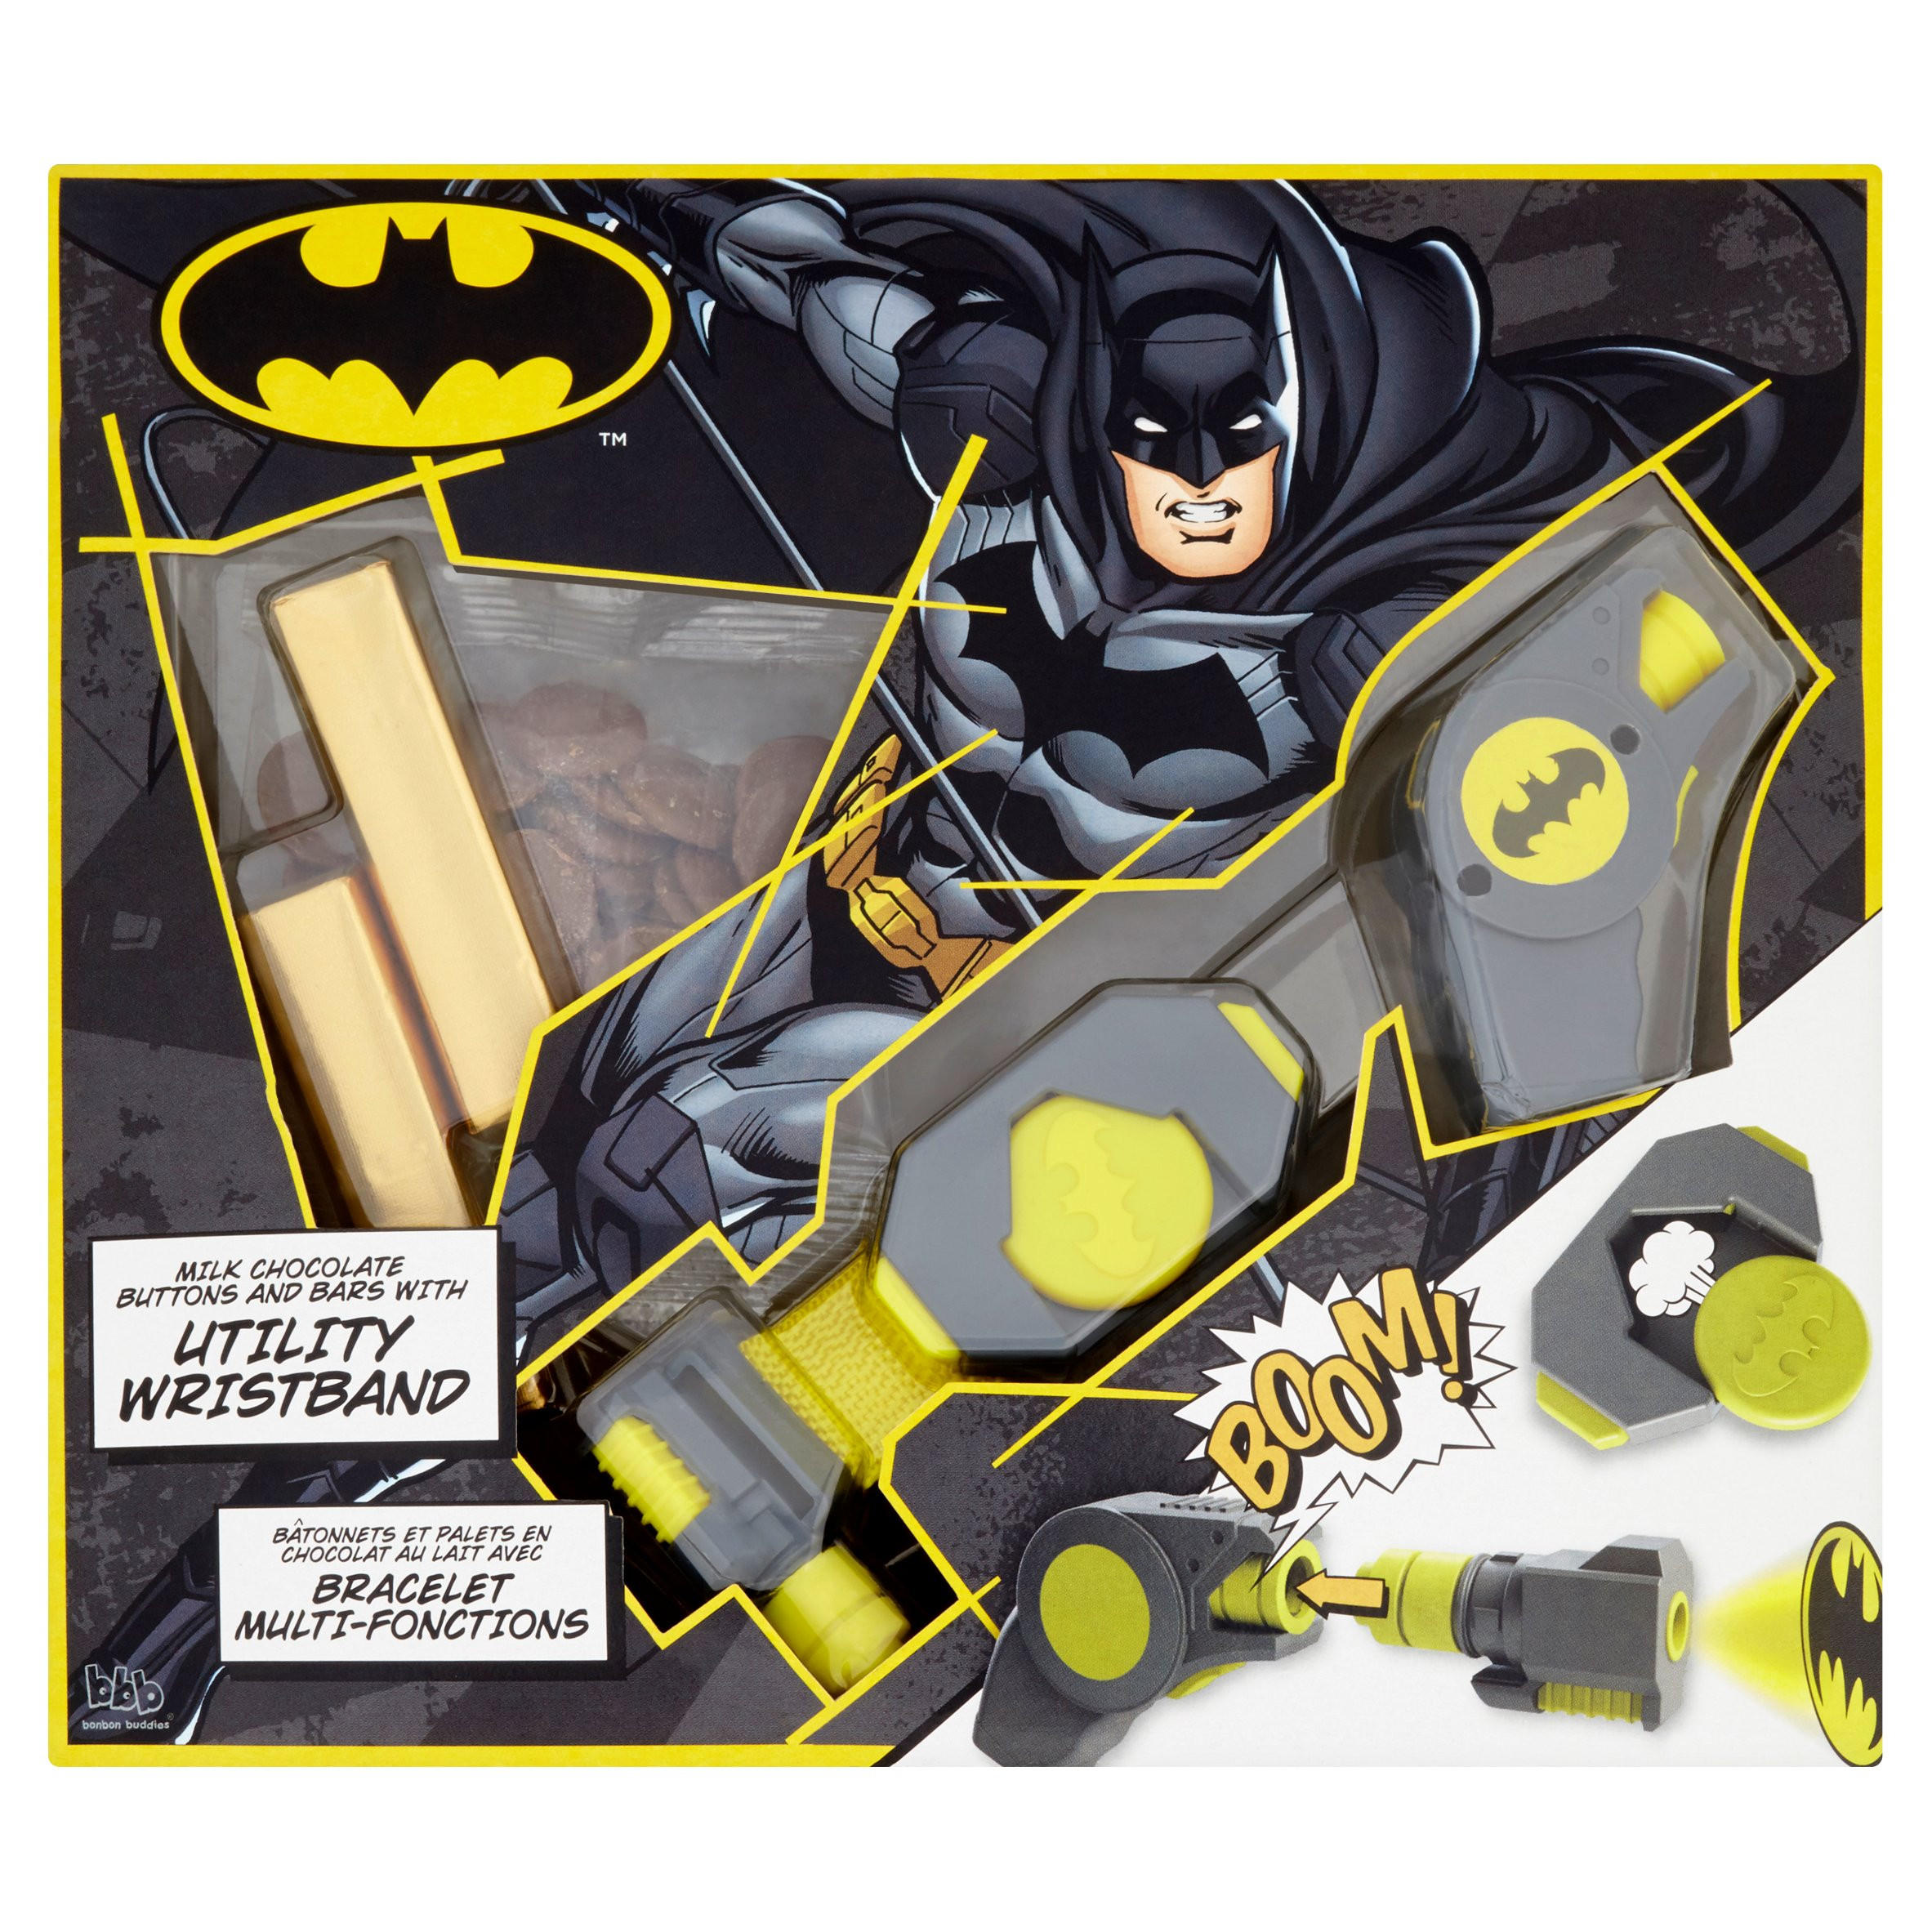 Batman Milk Chocolate Buttons and Bars with Utility Wristband 55g | Single Chocolate  Bars & Bags | Iceland Foods